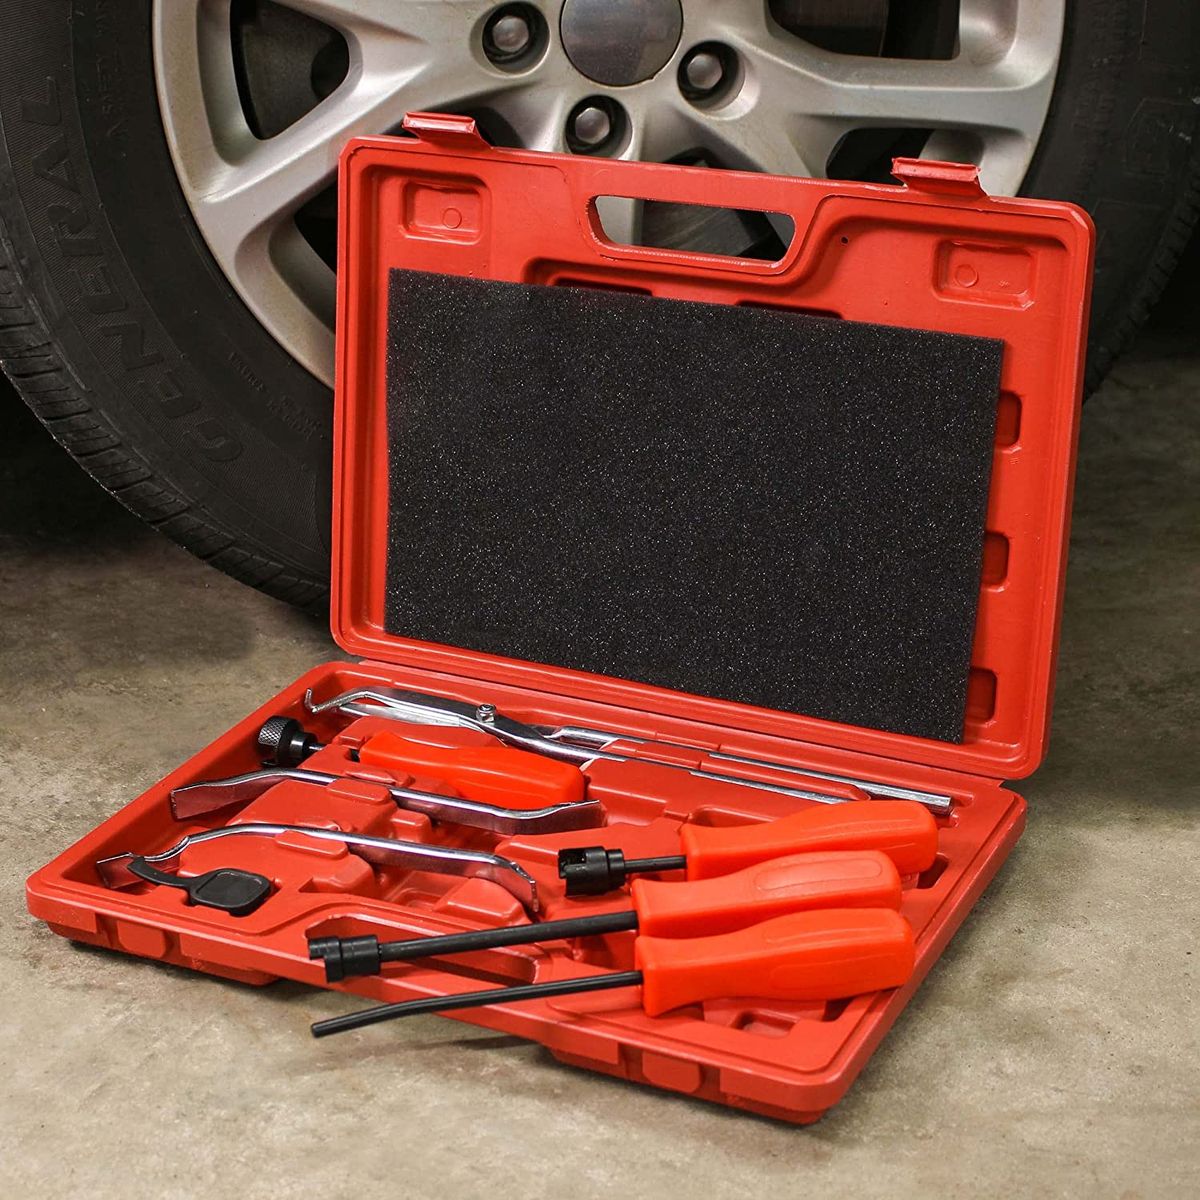 8 piece brake tool kit in a red blow molded case sitting on a beige floor.